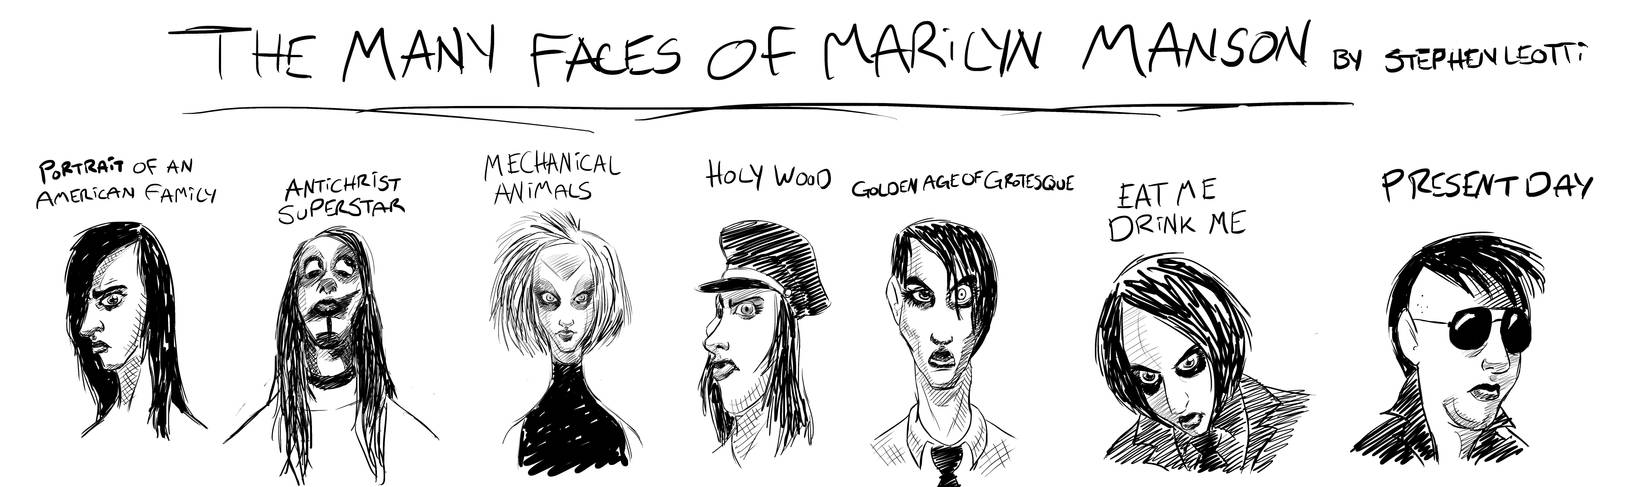 The many faces of Marilyn Manson final